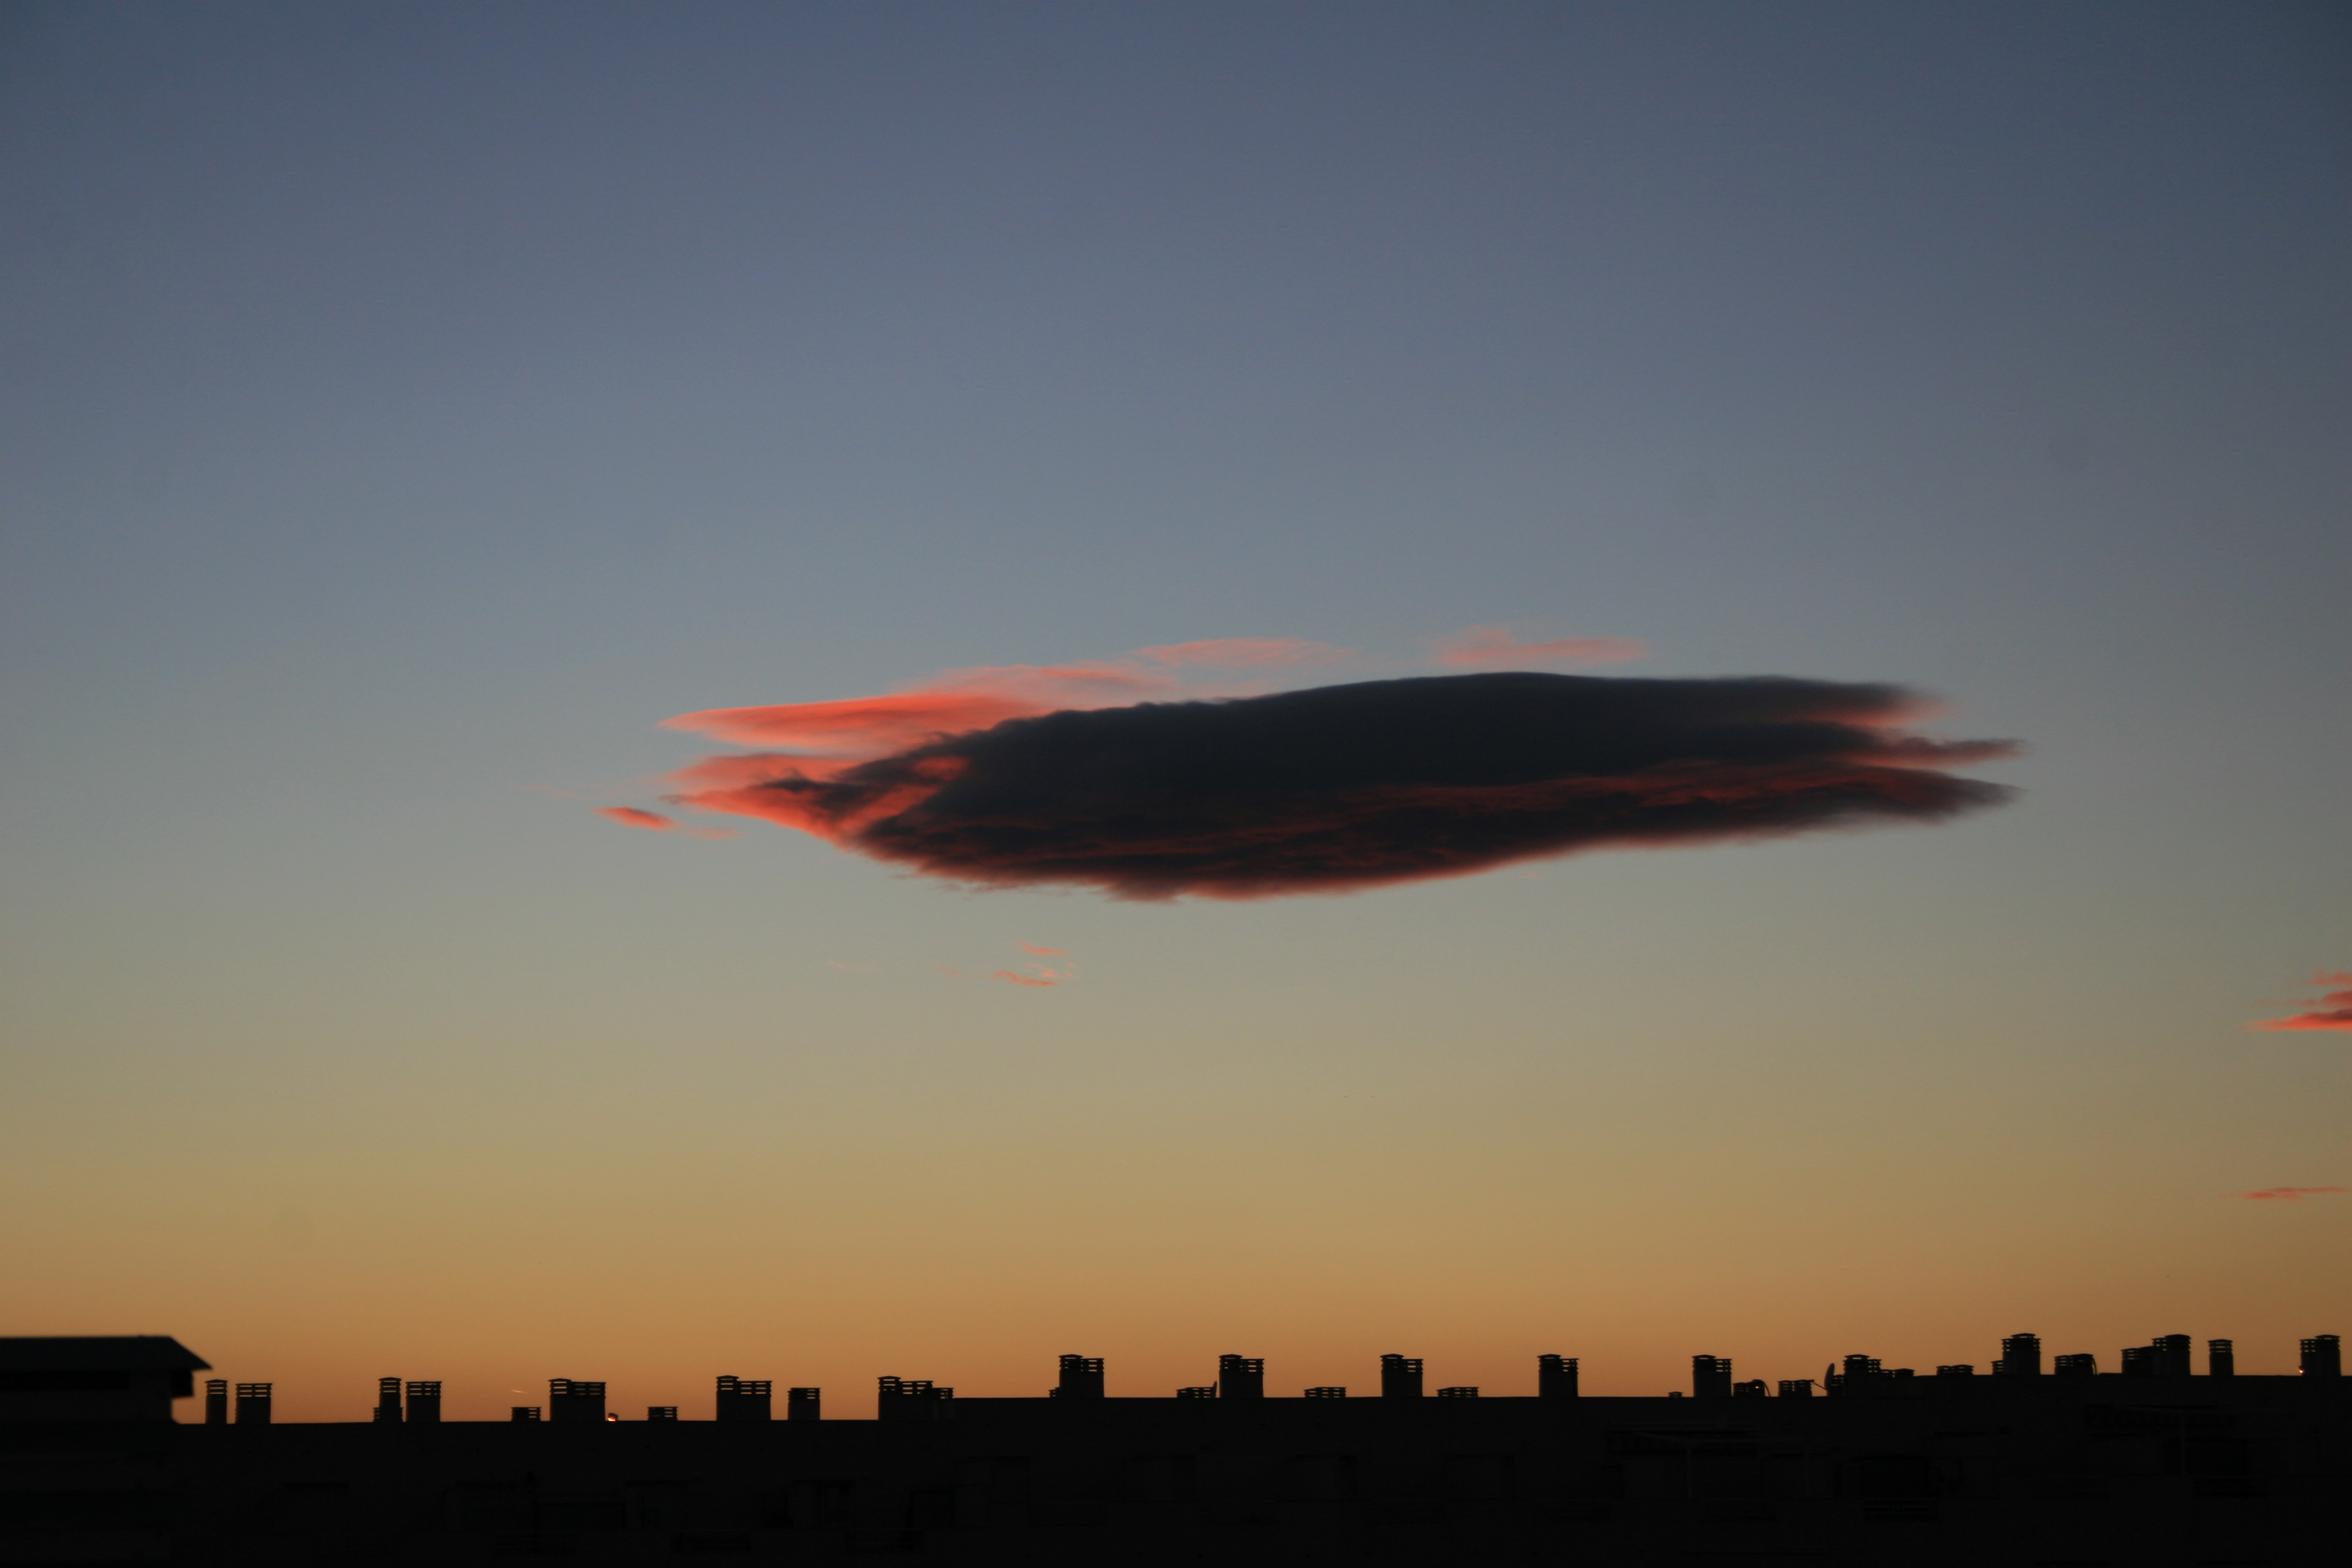 Cloud at dusk over the skyline of Alicante, Spain.